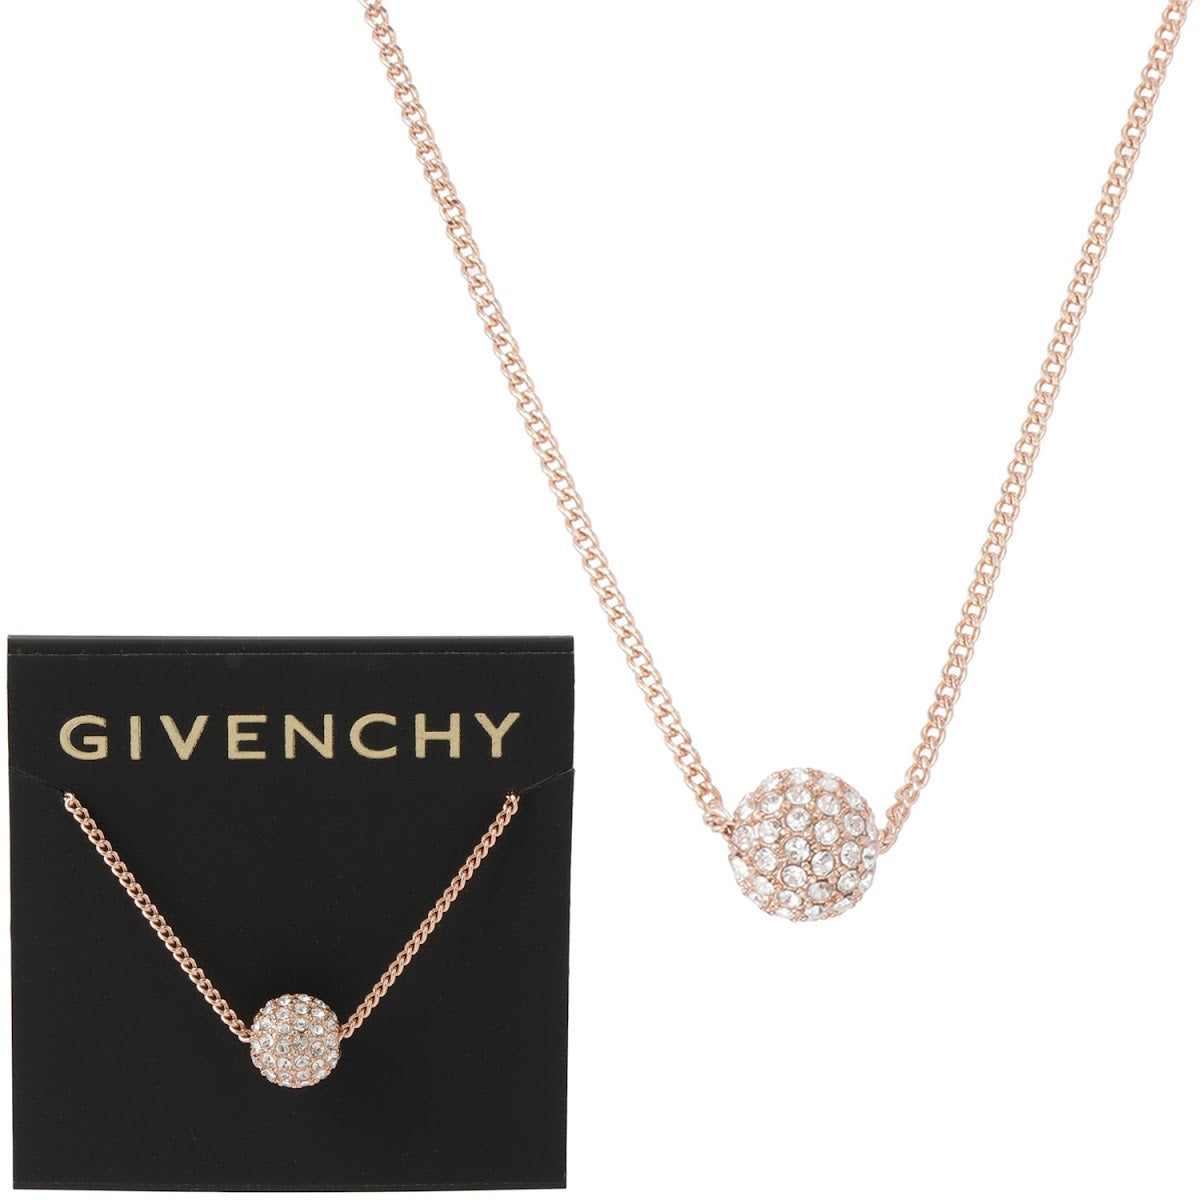 Givenchy RARE GIVENCHY ROSE GOLD CHAIN NECKLACE | Grailed